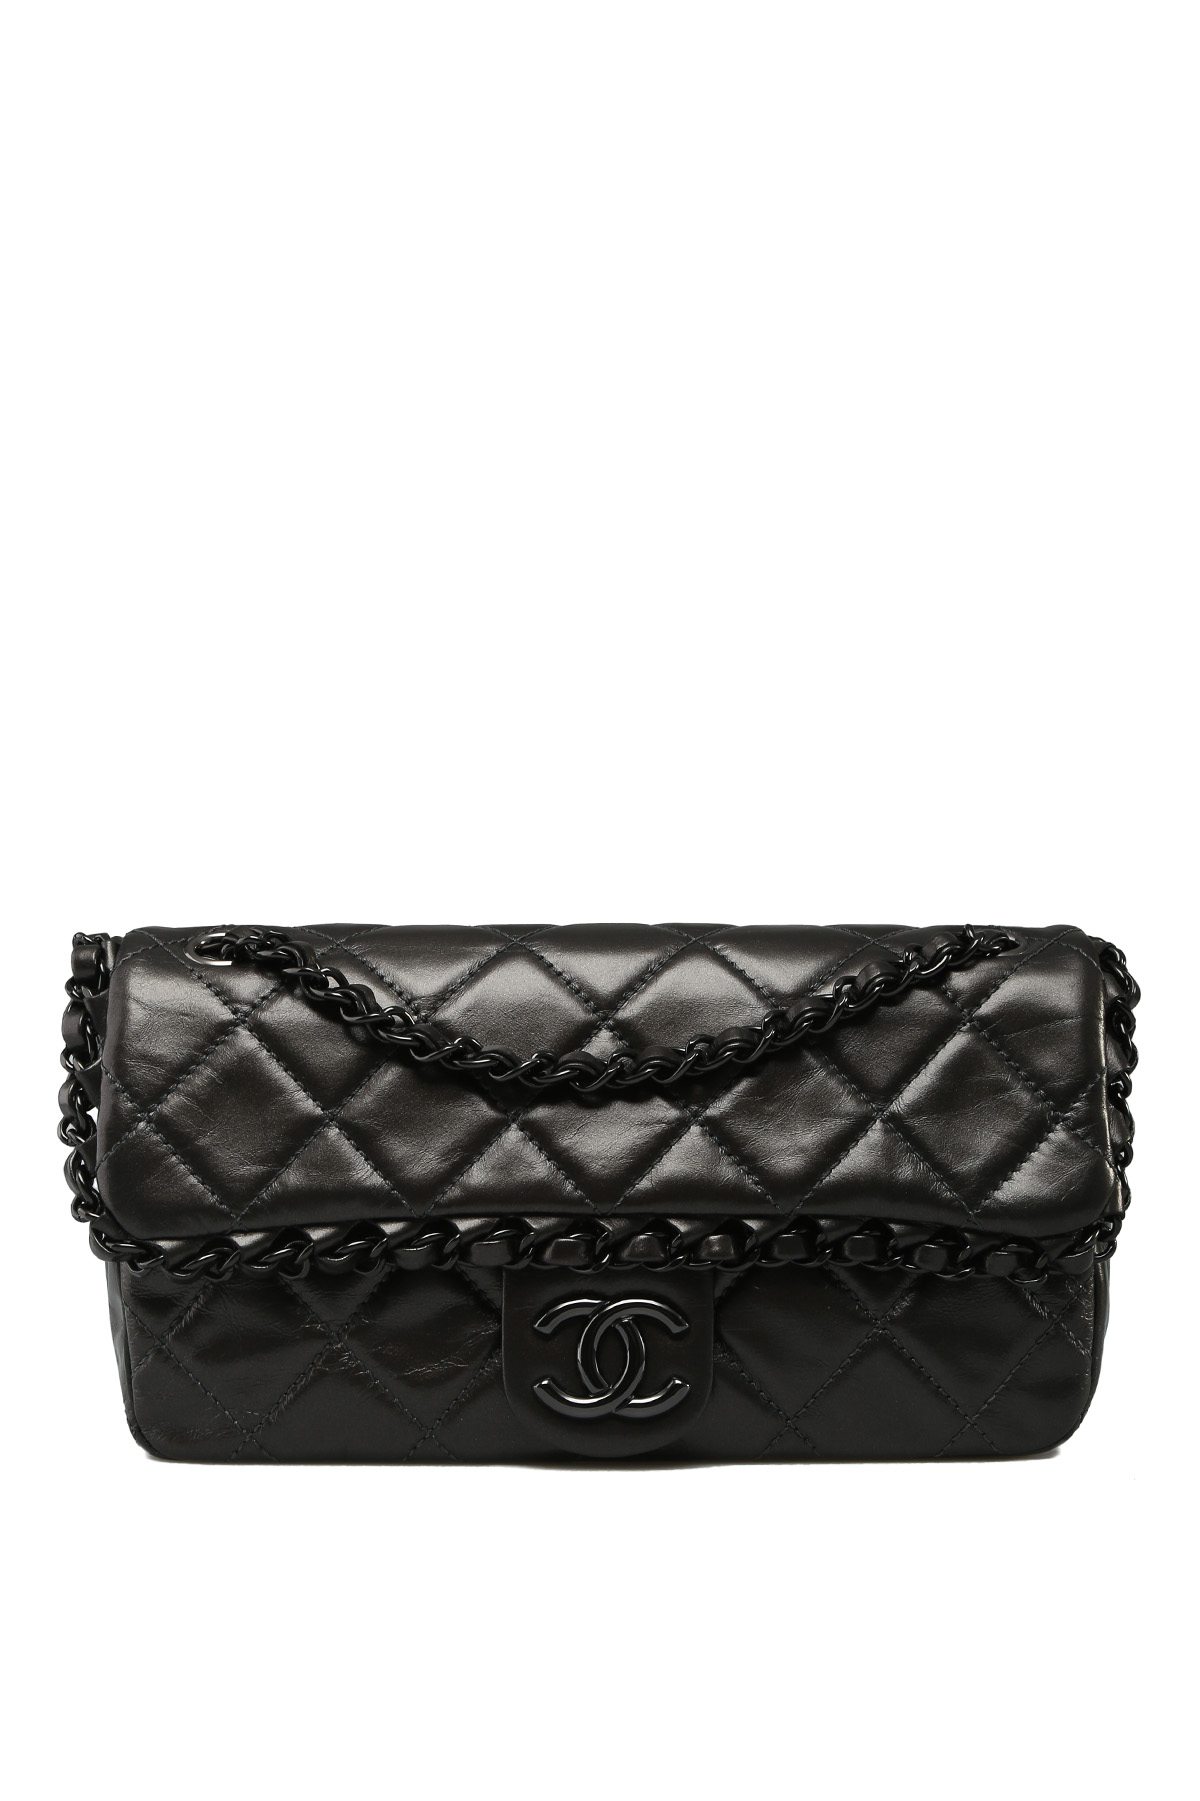 Chanel Chain Around Single Flap Bag in Pearly Metallic Calfskin with So  Black Hardware